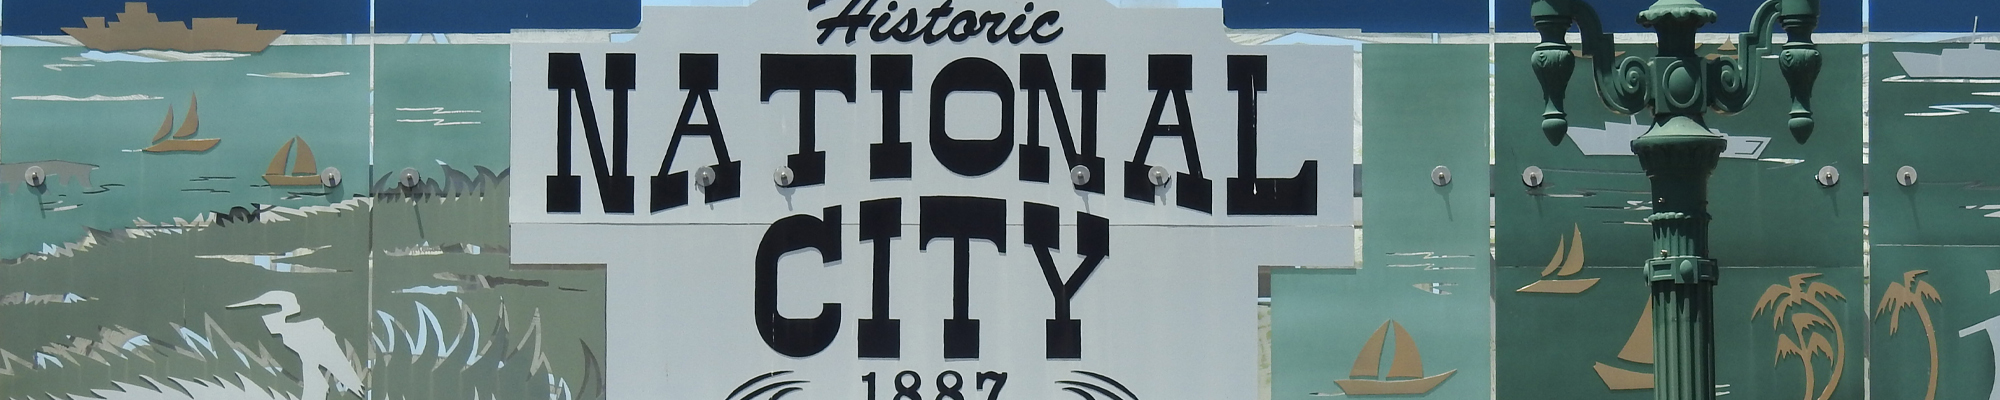 sign: Historic National City 1887